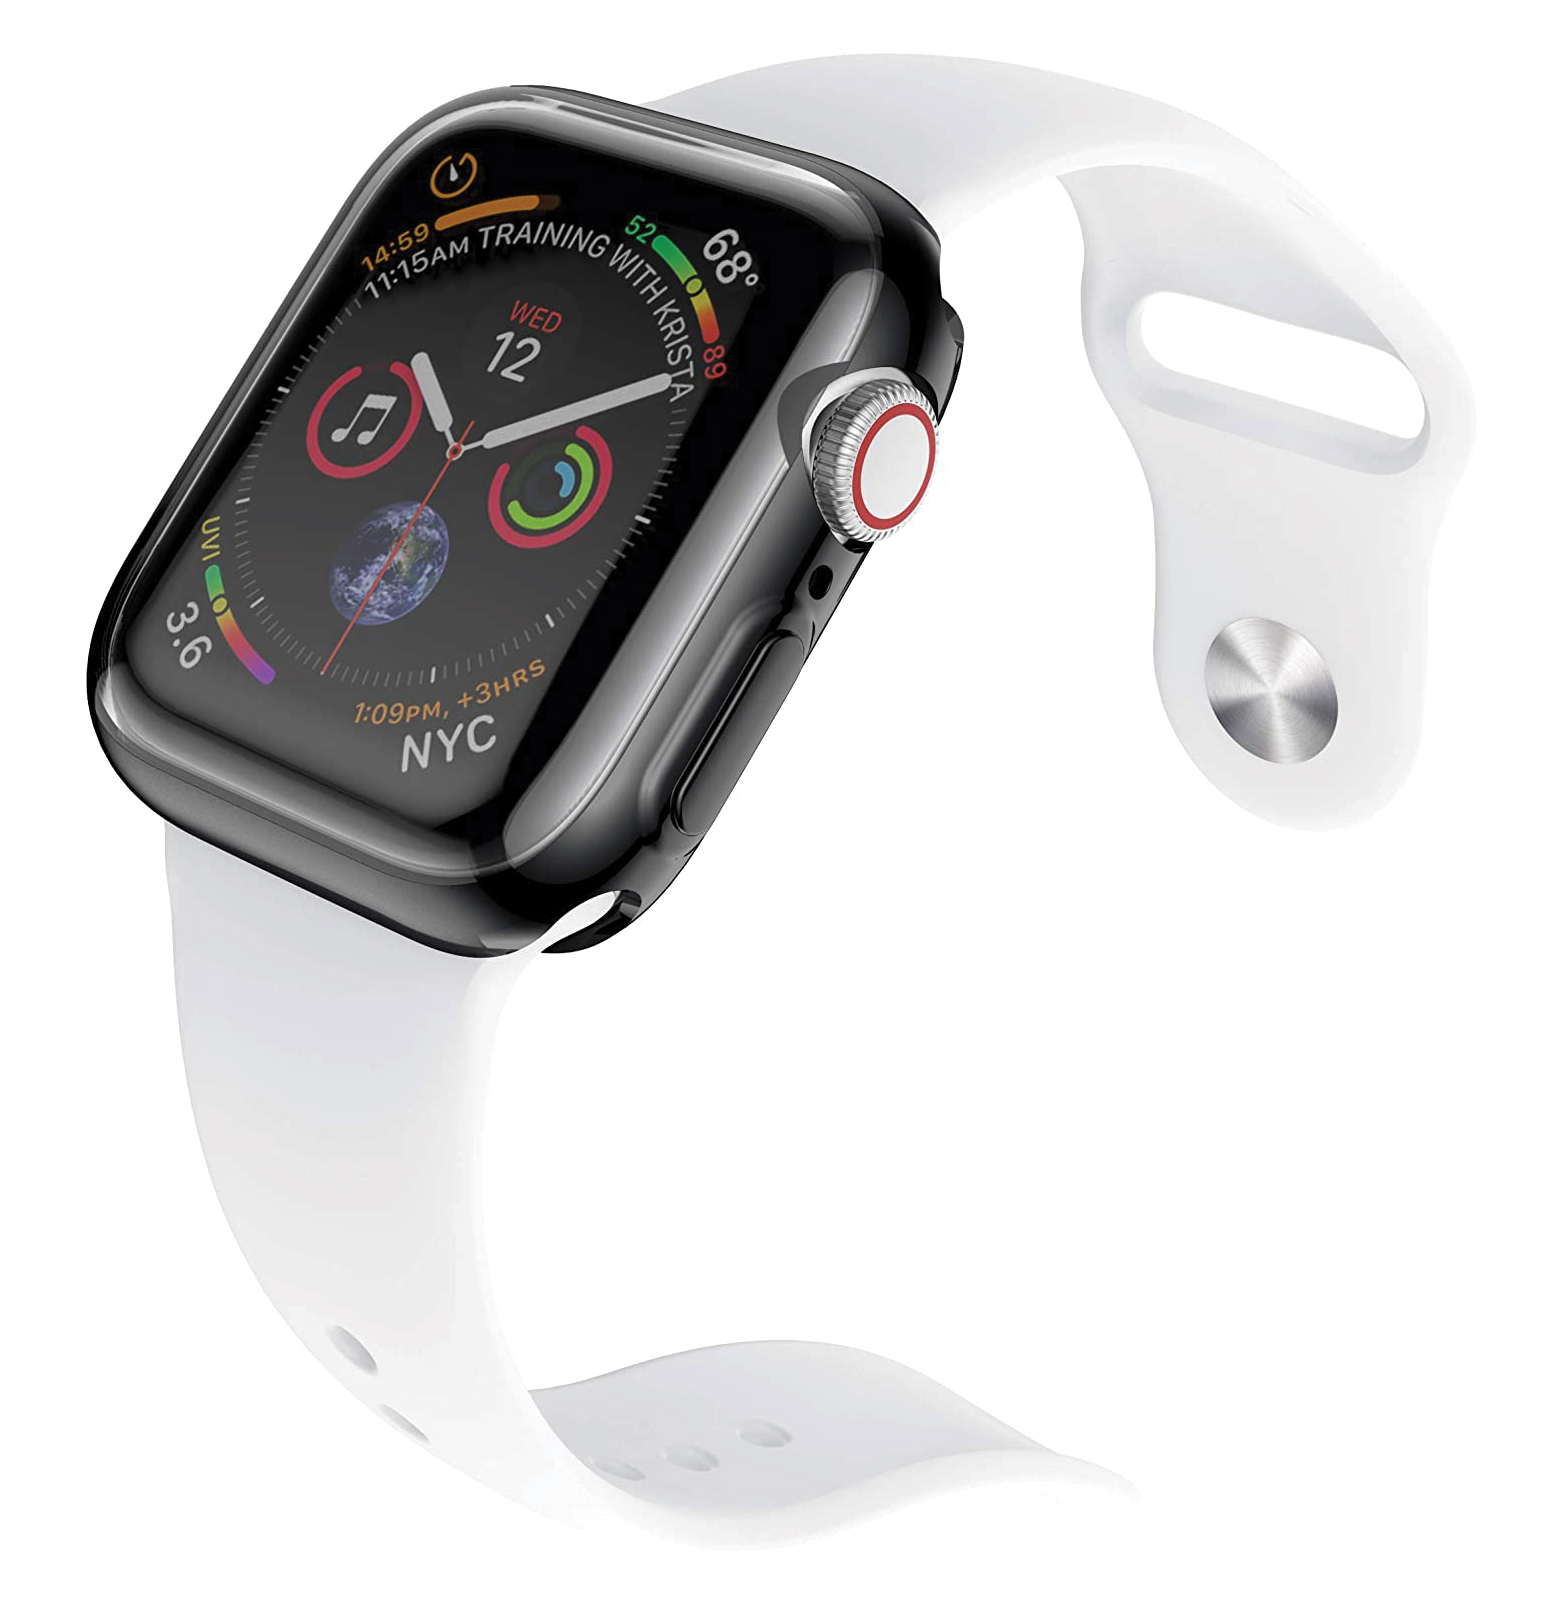 Base Bumper Tempered Glass for Apple Watch Series 1,2,3 Large (42mm)